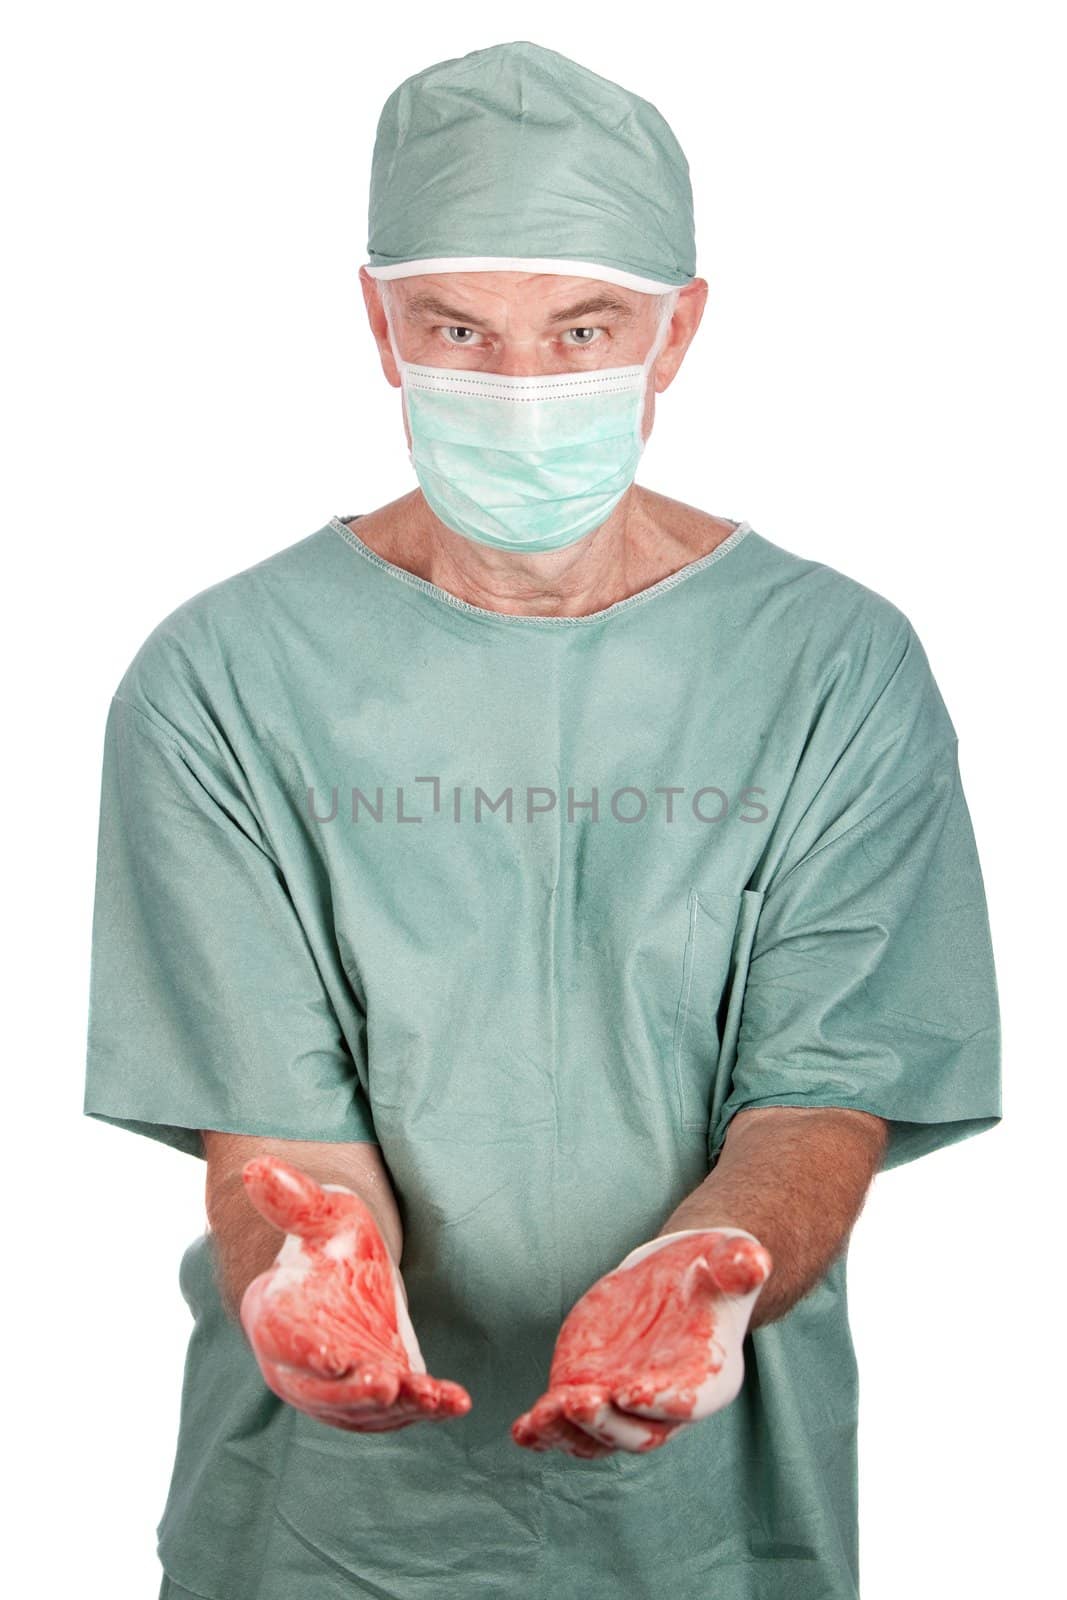 A 60 year old surgeon with bloody hands on a white background.